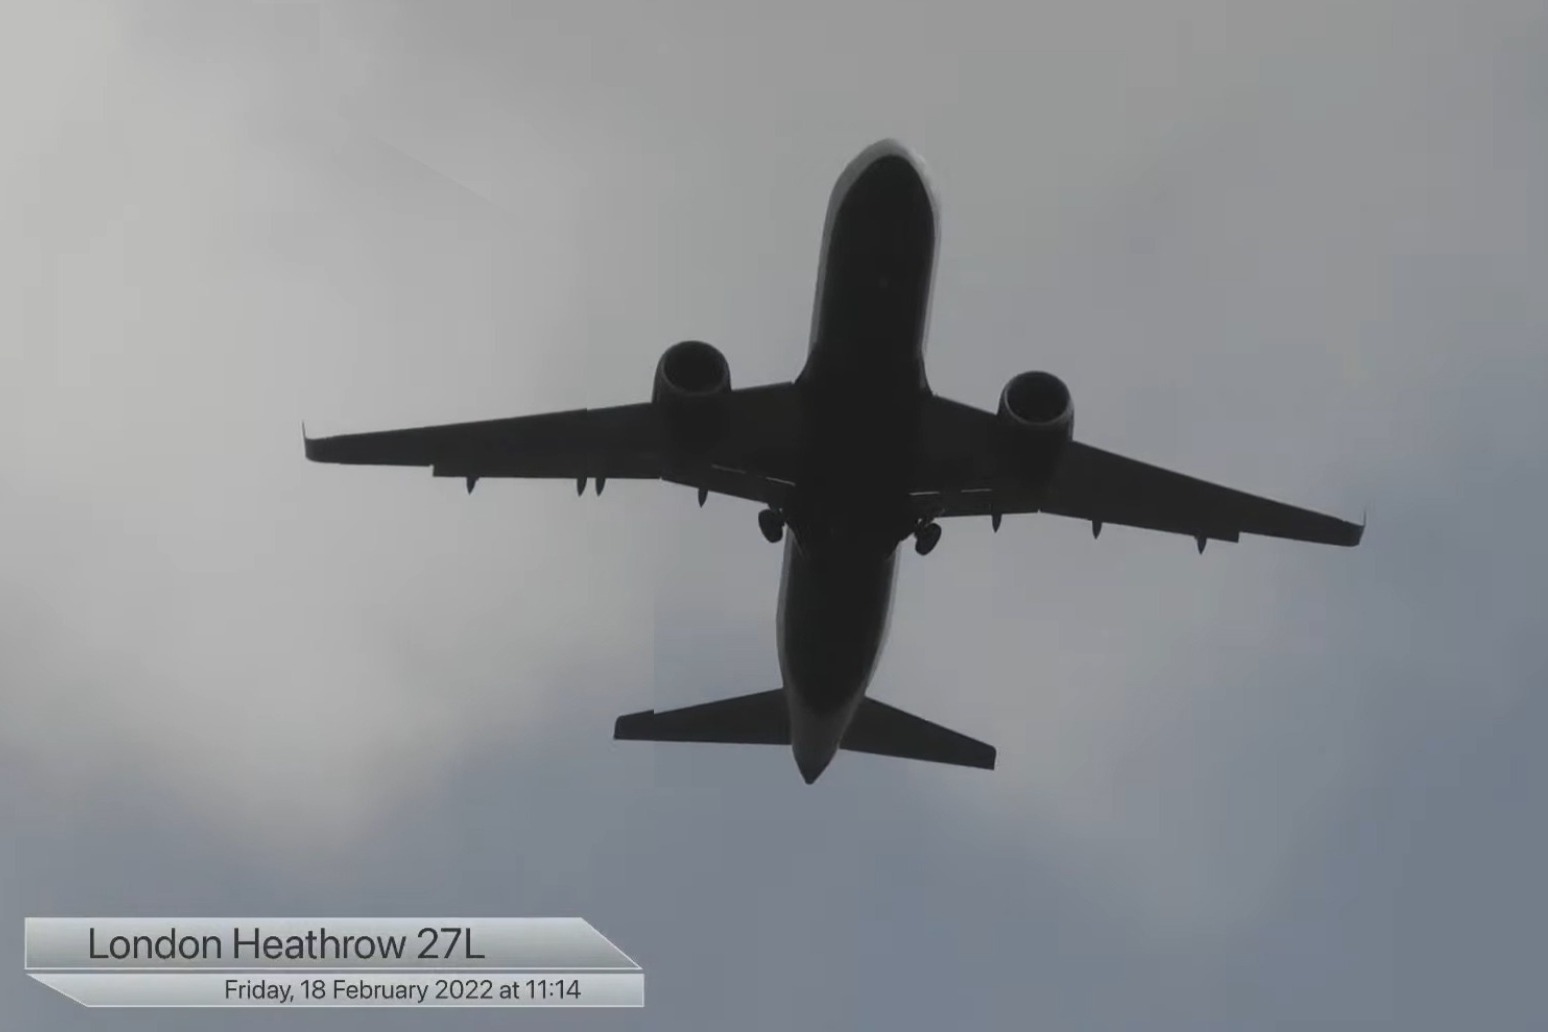 Big Jet TV Thousands tune in to watch flights landing at Heathrow amid storm